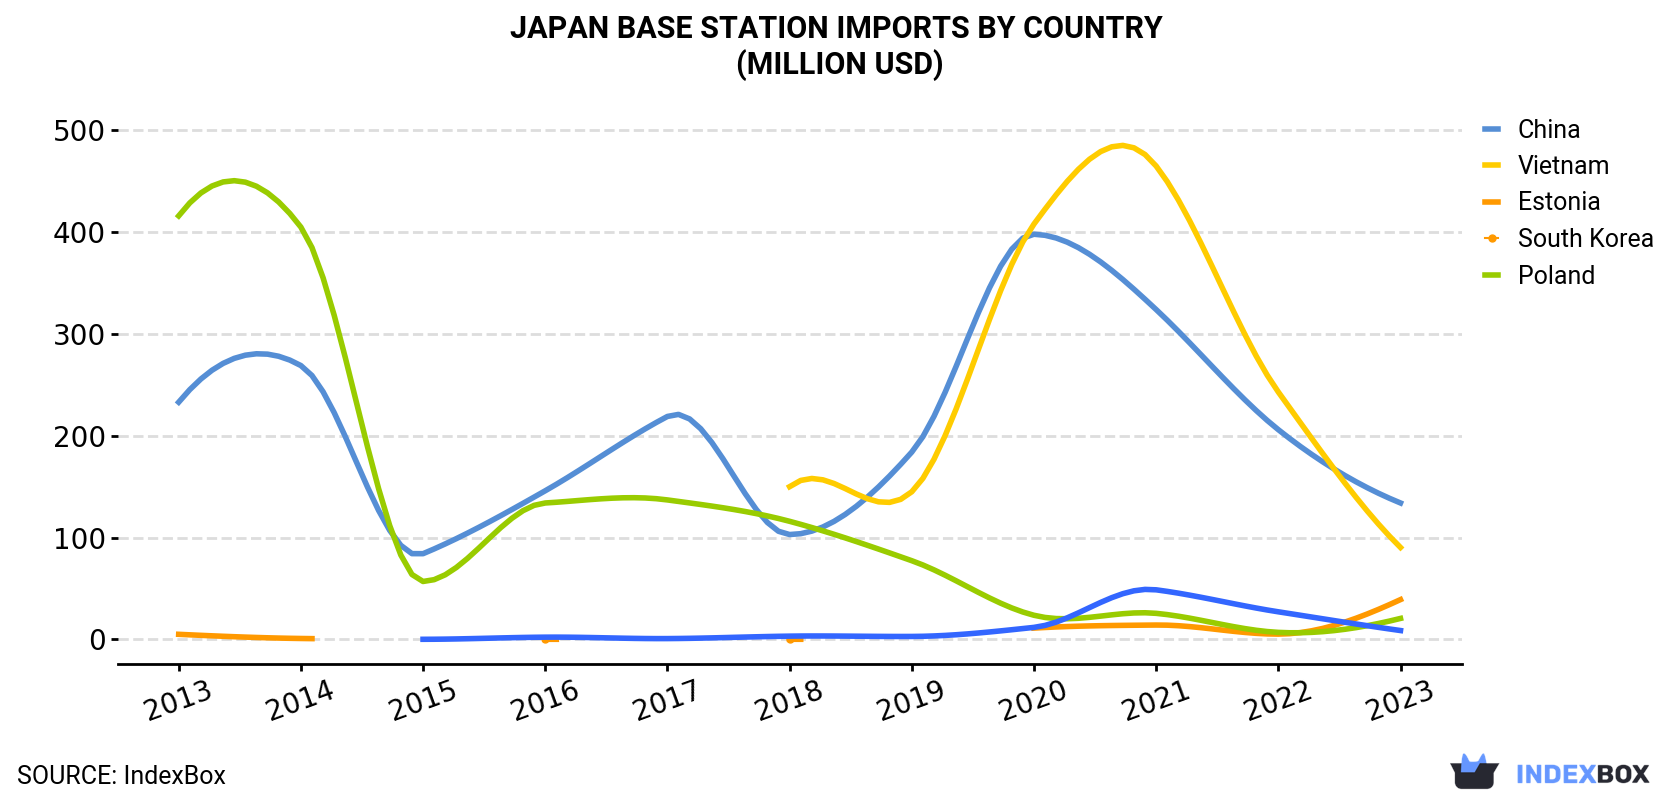 Japan Base Station Imports By Country (Million USD)